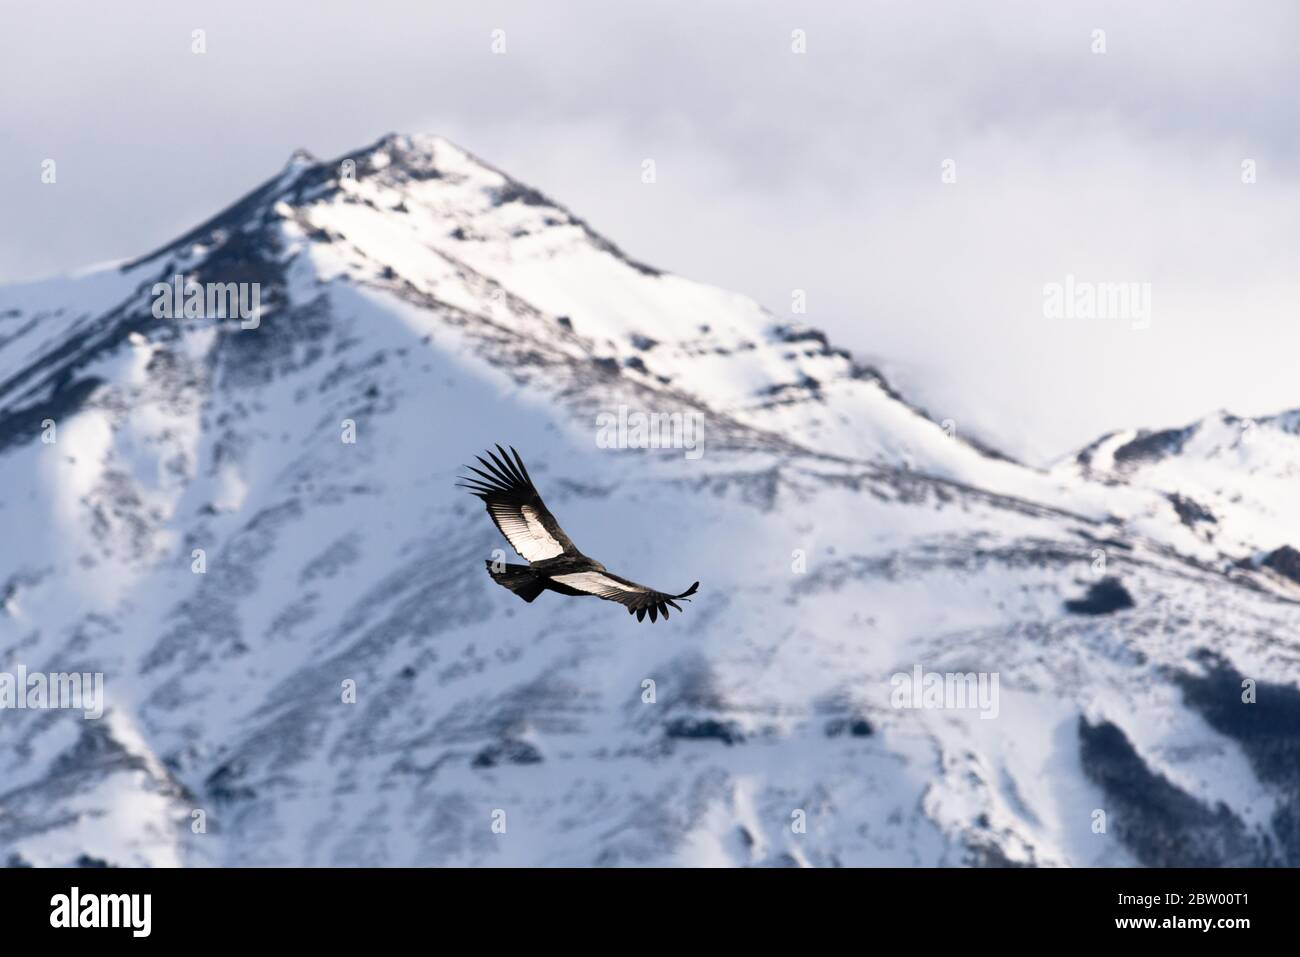 An adult Andean Condor (Vultur gryphus) flying with the snowy Andes in the background Stock Photo